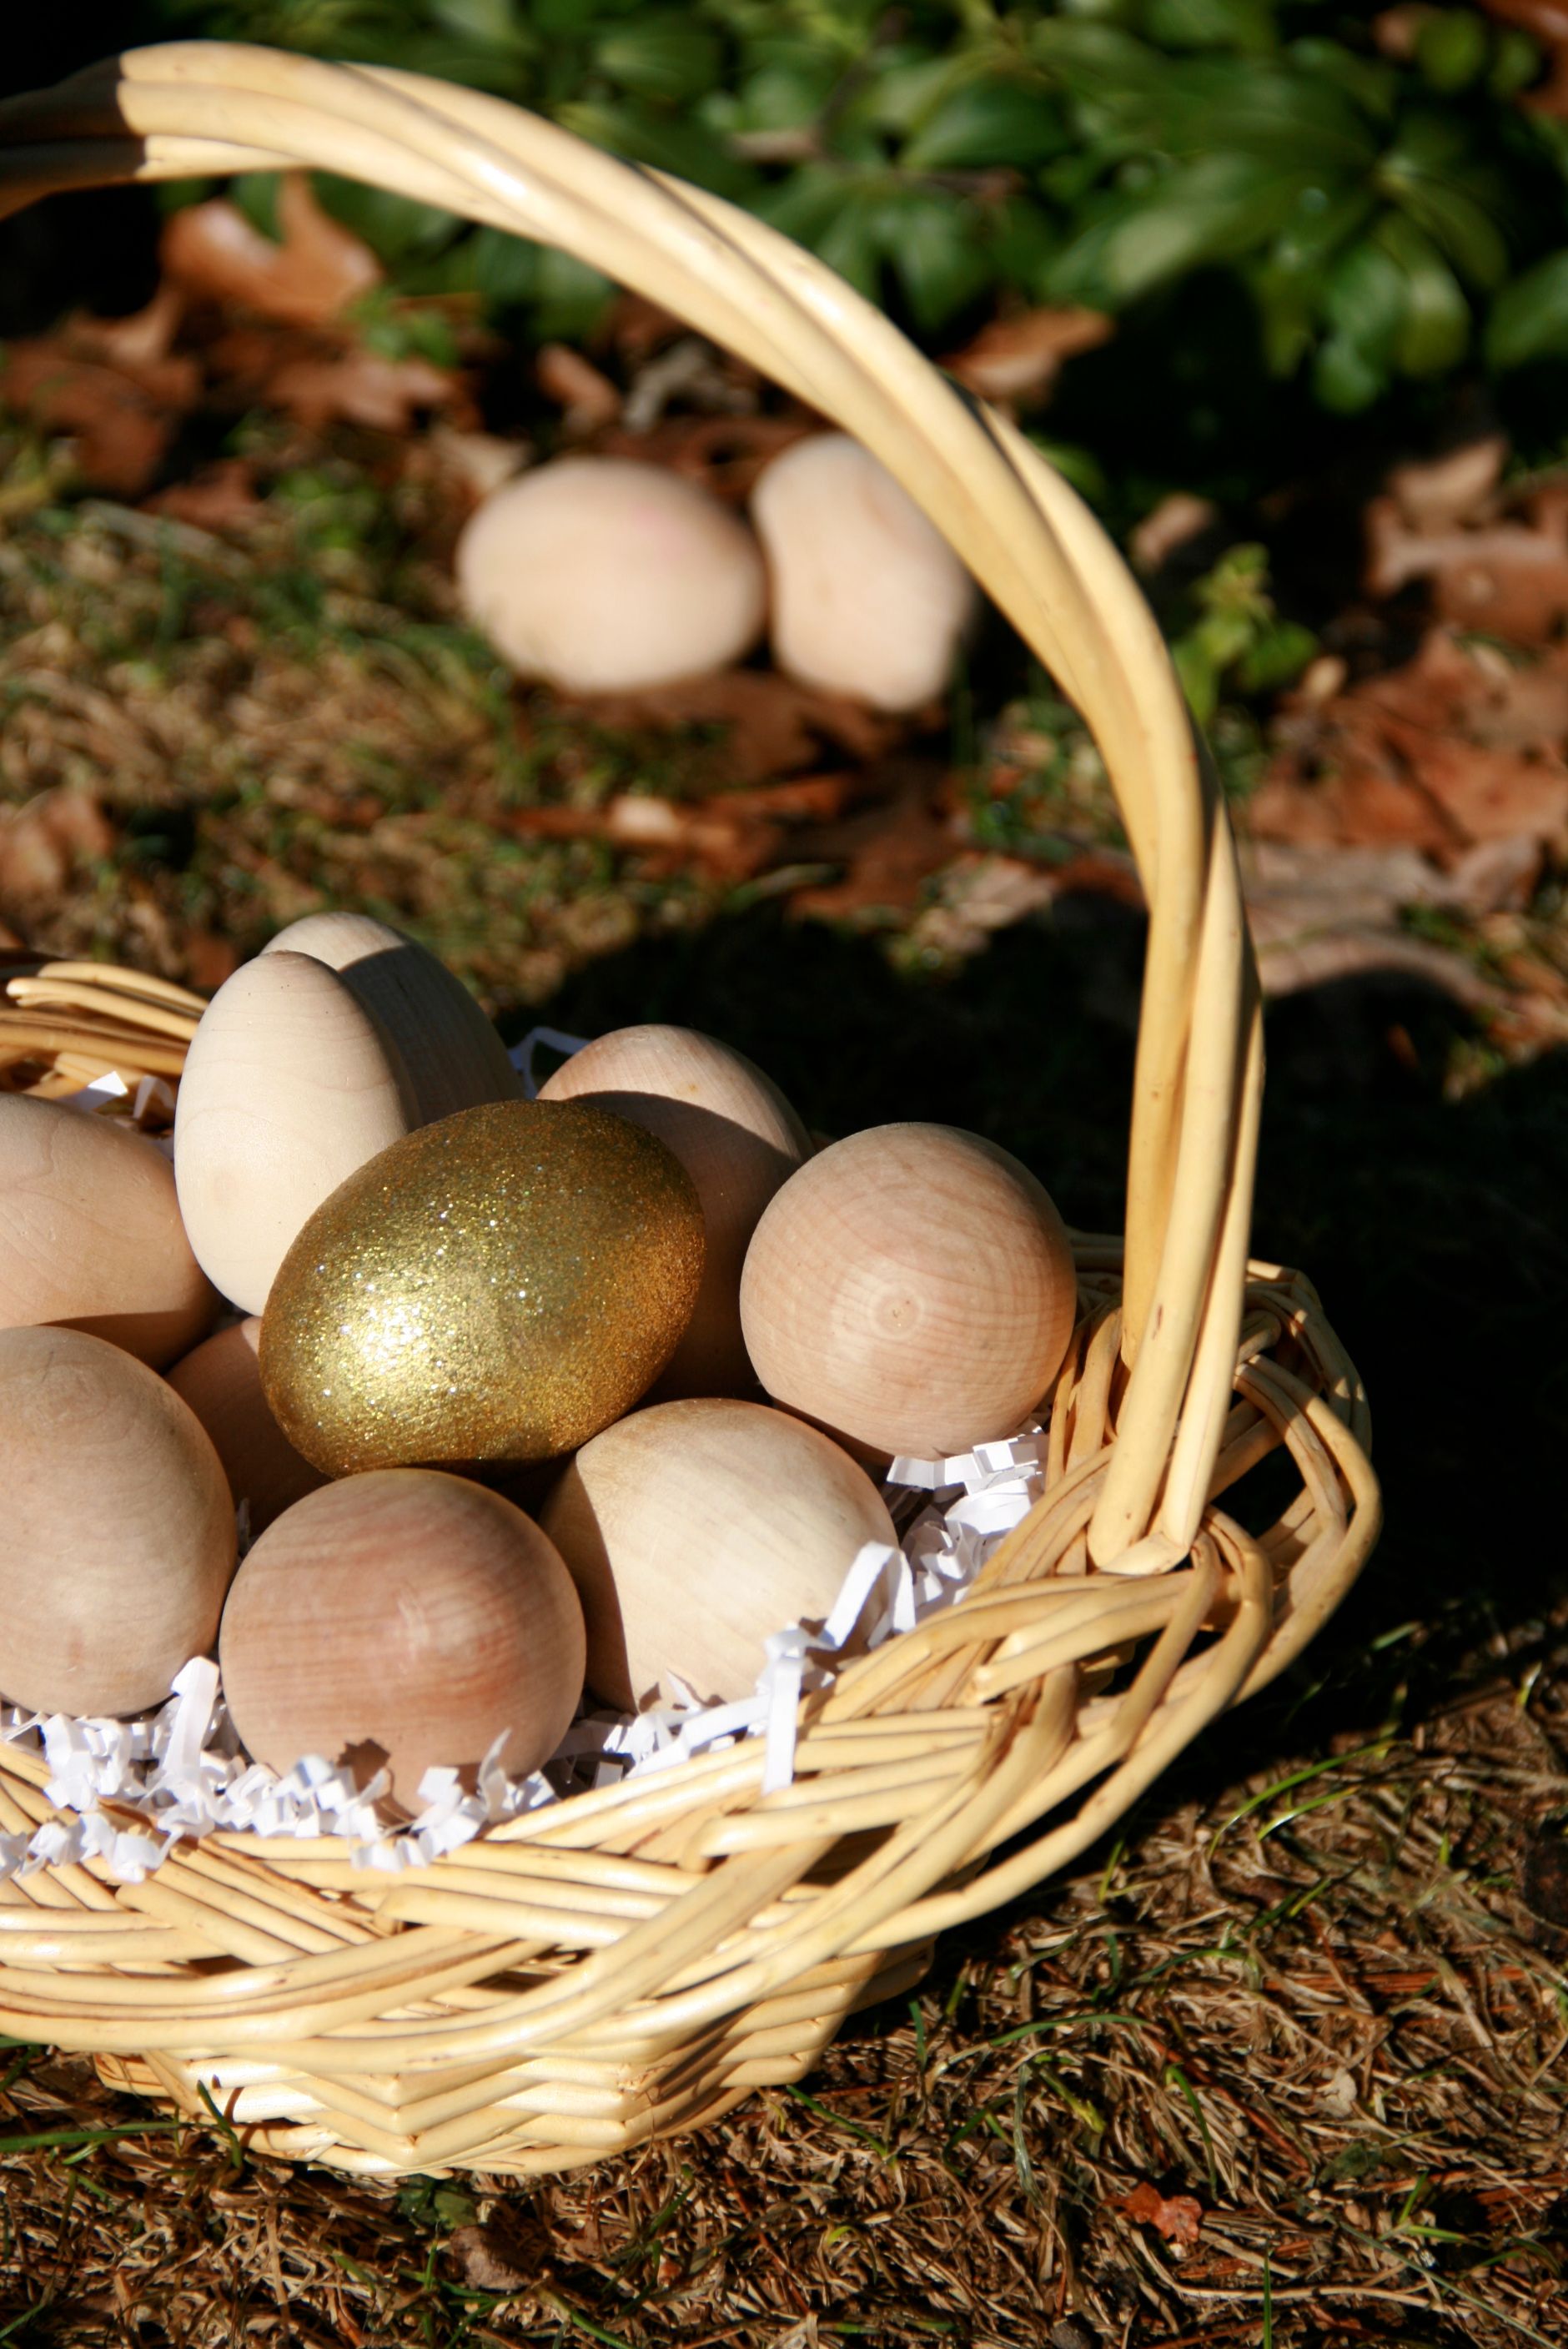 Camouflaged Egg Hunt this Saturday